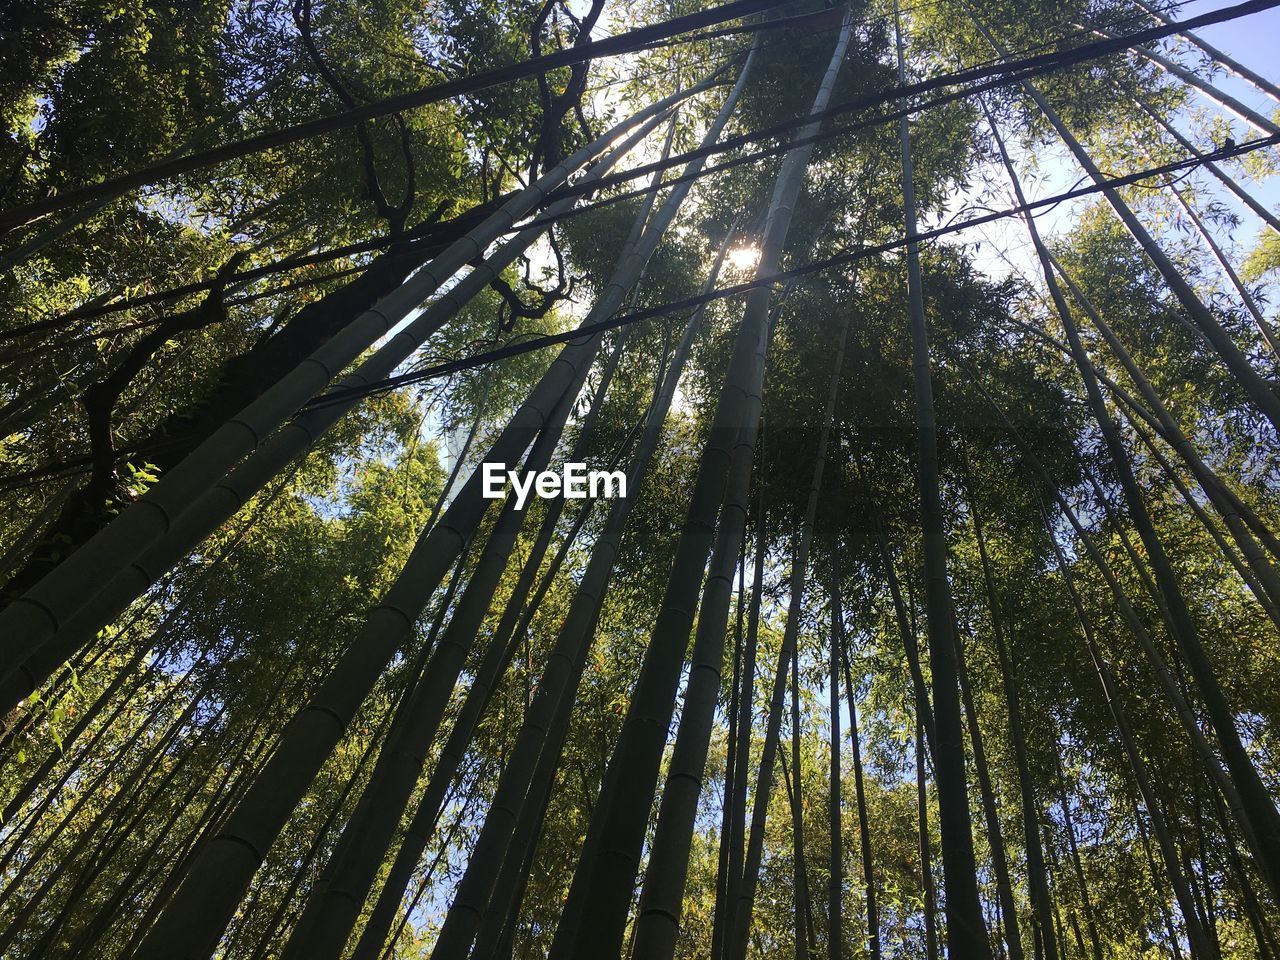 tree, plant, low angle view, sunlight, growth, forest, beauty in nature, land, tranquility, branch, nature, tree trunk, no people, trunk, leaf, sky, woodland, day, bamboo - plant, natural environment, bamboo grove, outdoors, bamboo, green, scenics - nature, tranquil scene, directly below, non-urban scene, tree canopy, environment, full frame, backgrounds